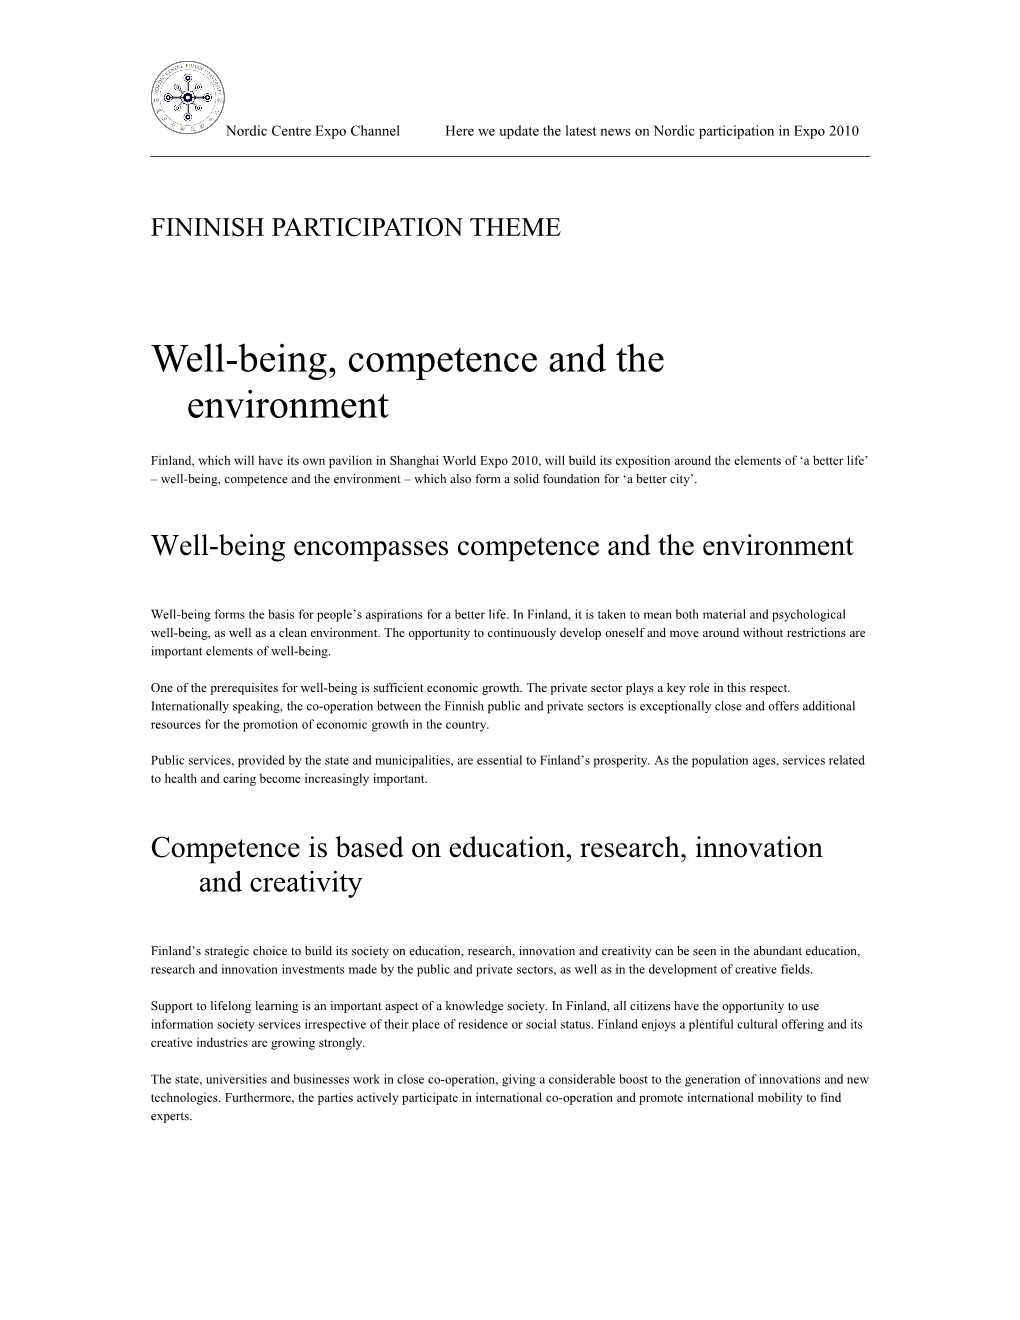 Well-Being, Competence and the Environment